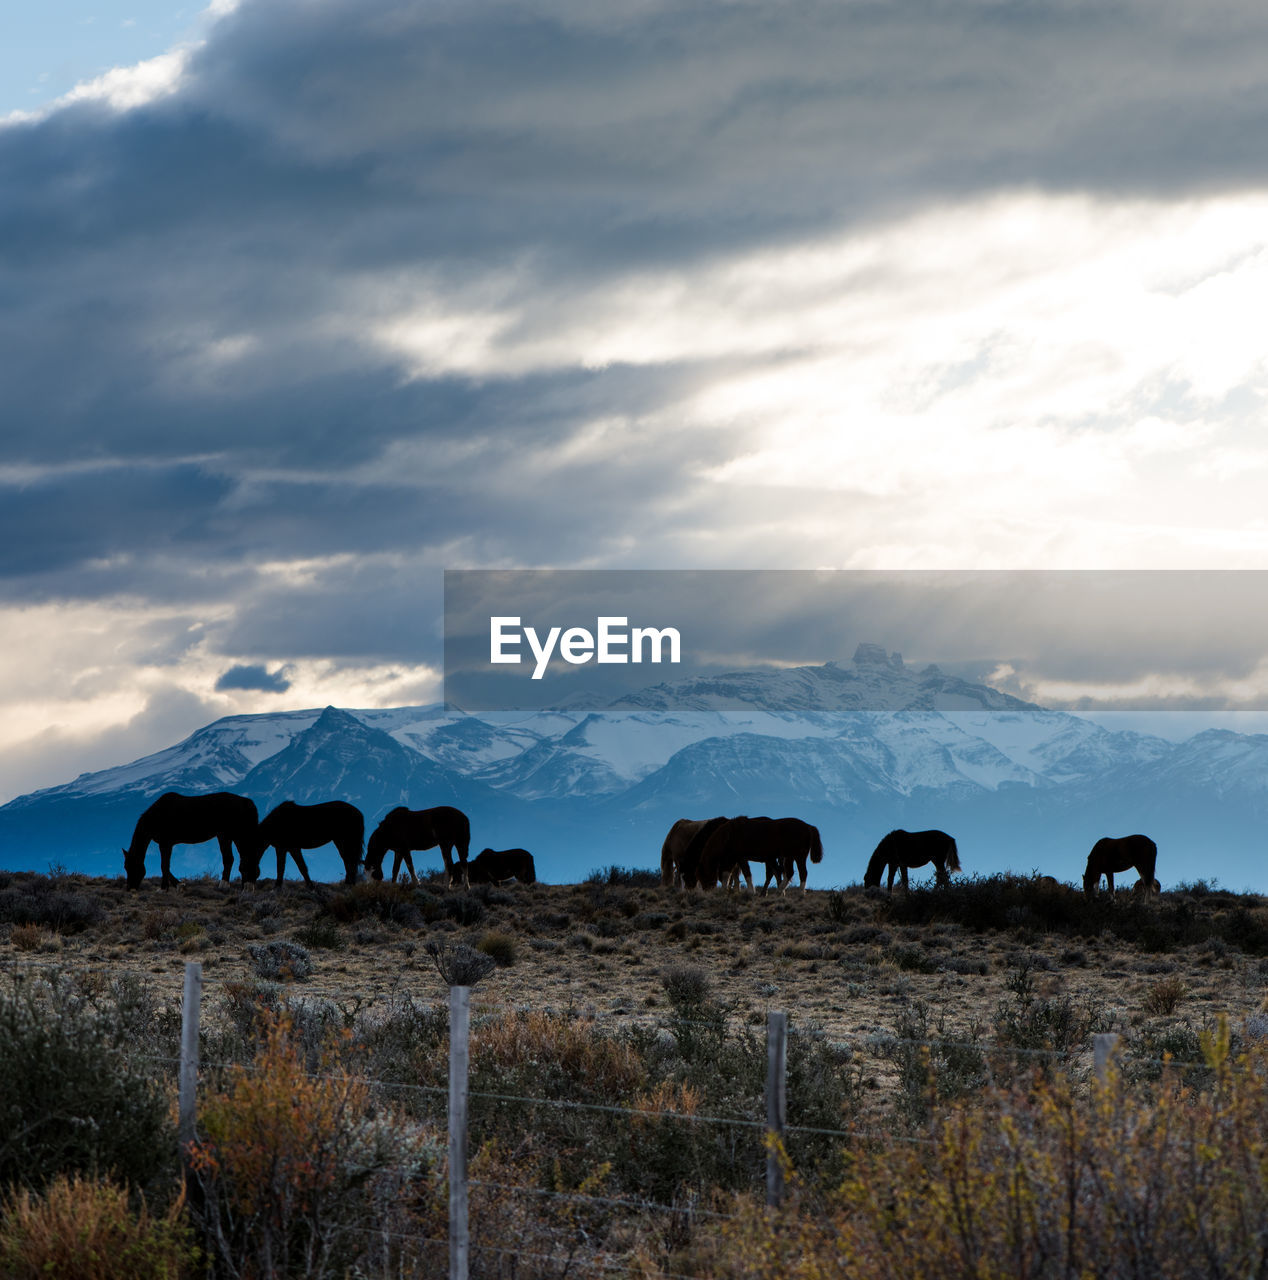 Horses grazing in patagonia, silhouetted against the sun with a backdrop of snowy mountains.